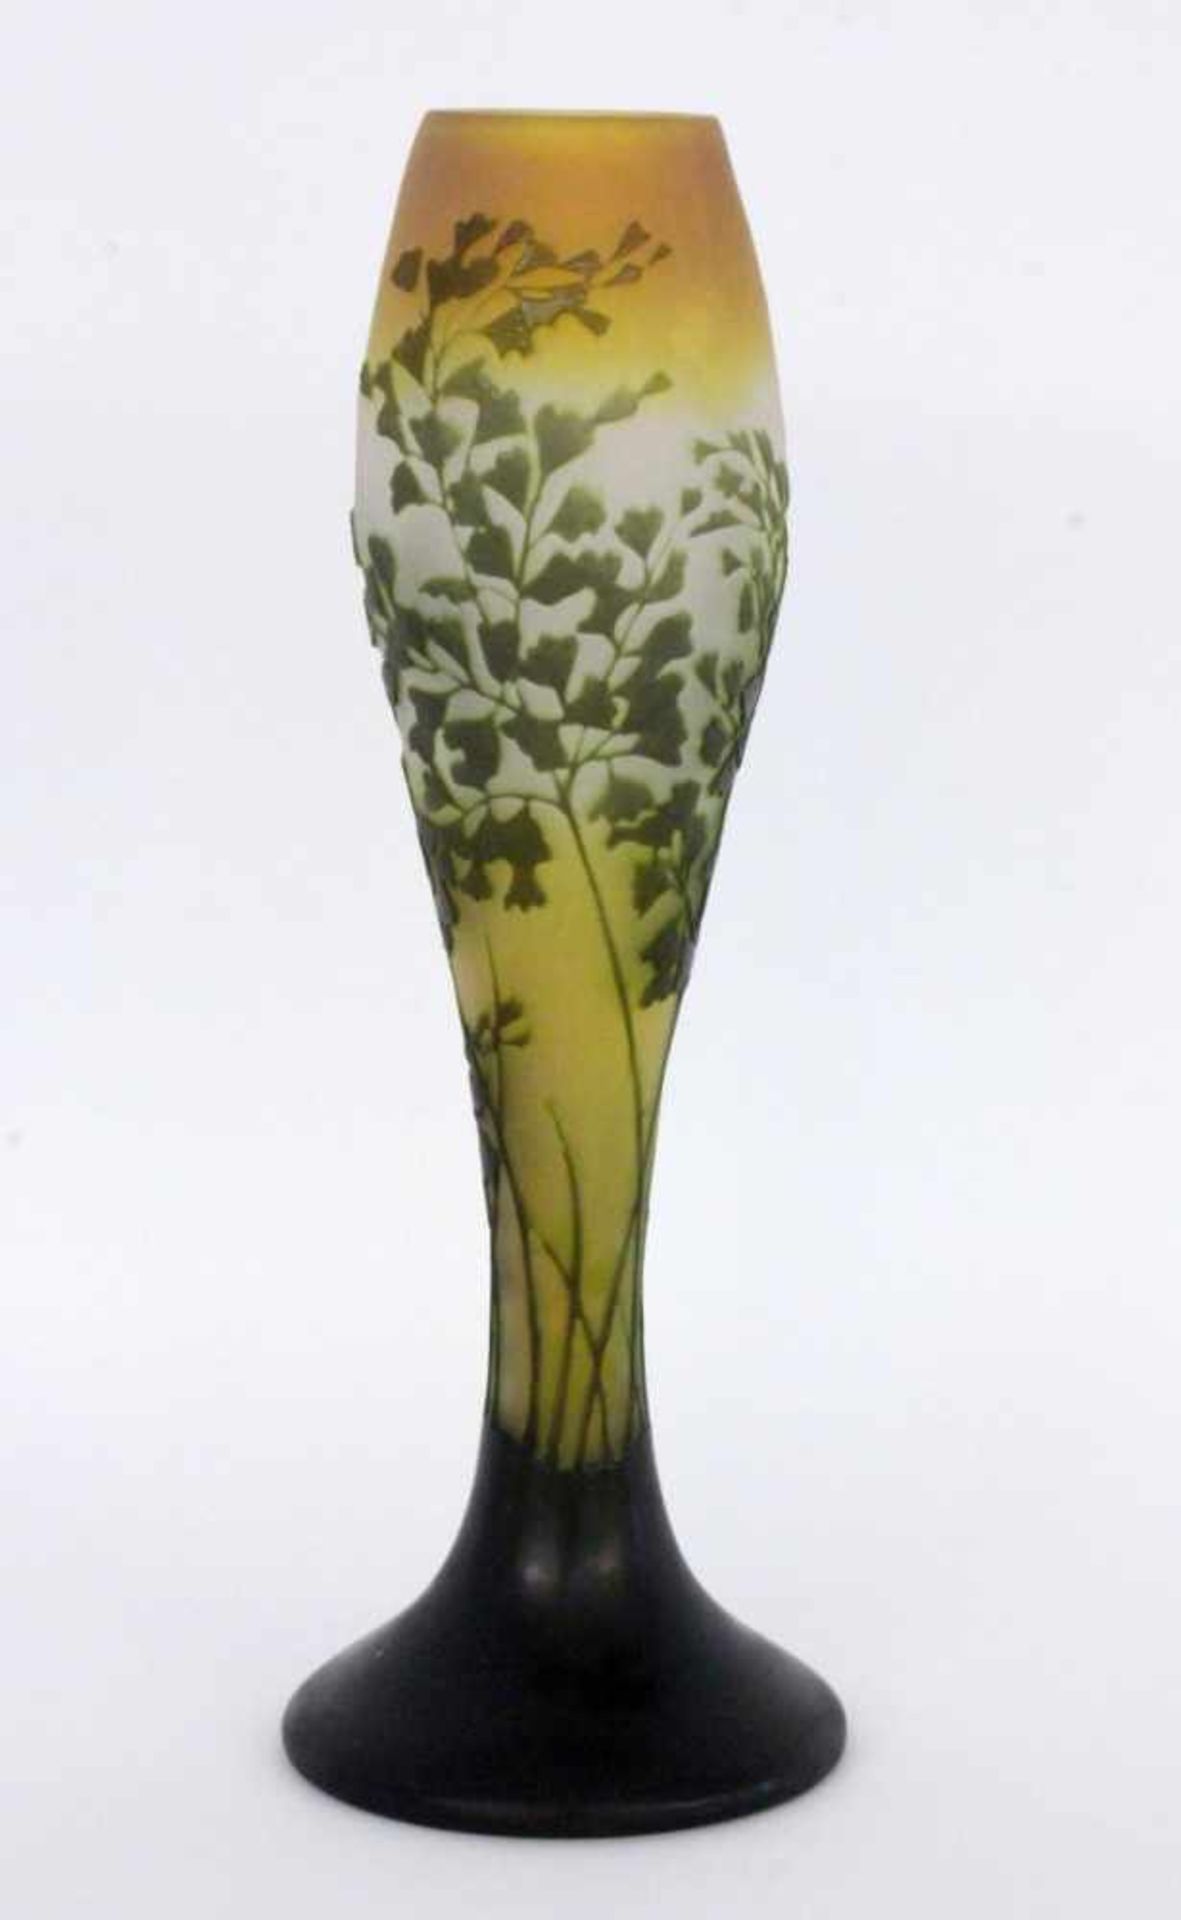 A GALLE CAMEO VASE WITH GINKGO LEAVES Emile Galle, Nancy circa 1900 - 1902 Multi-layered,